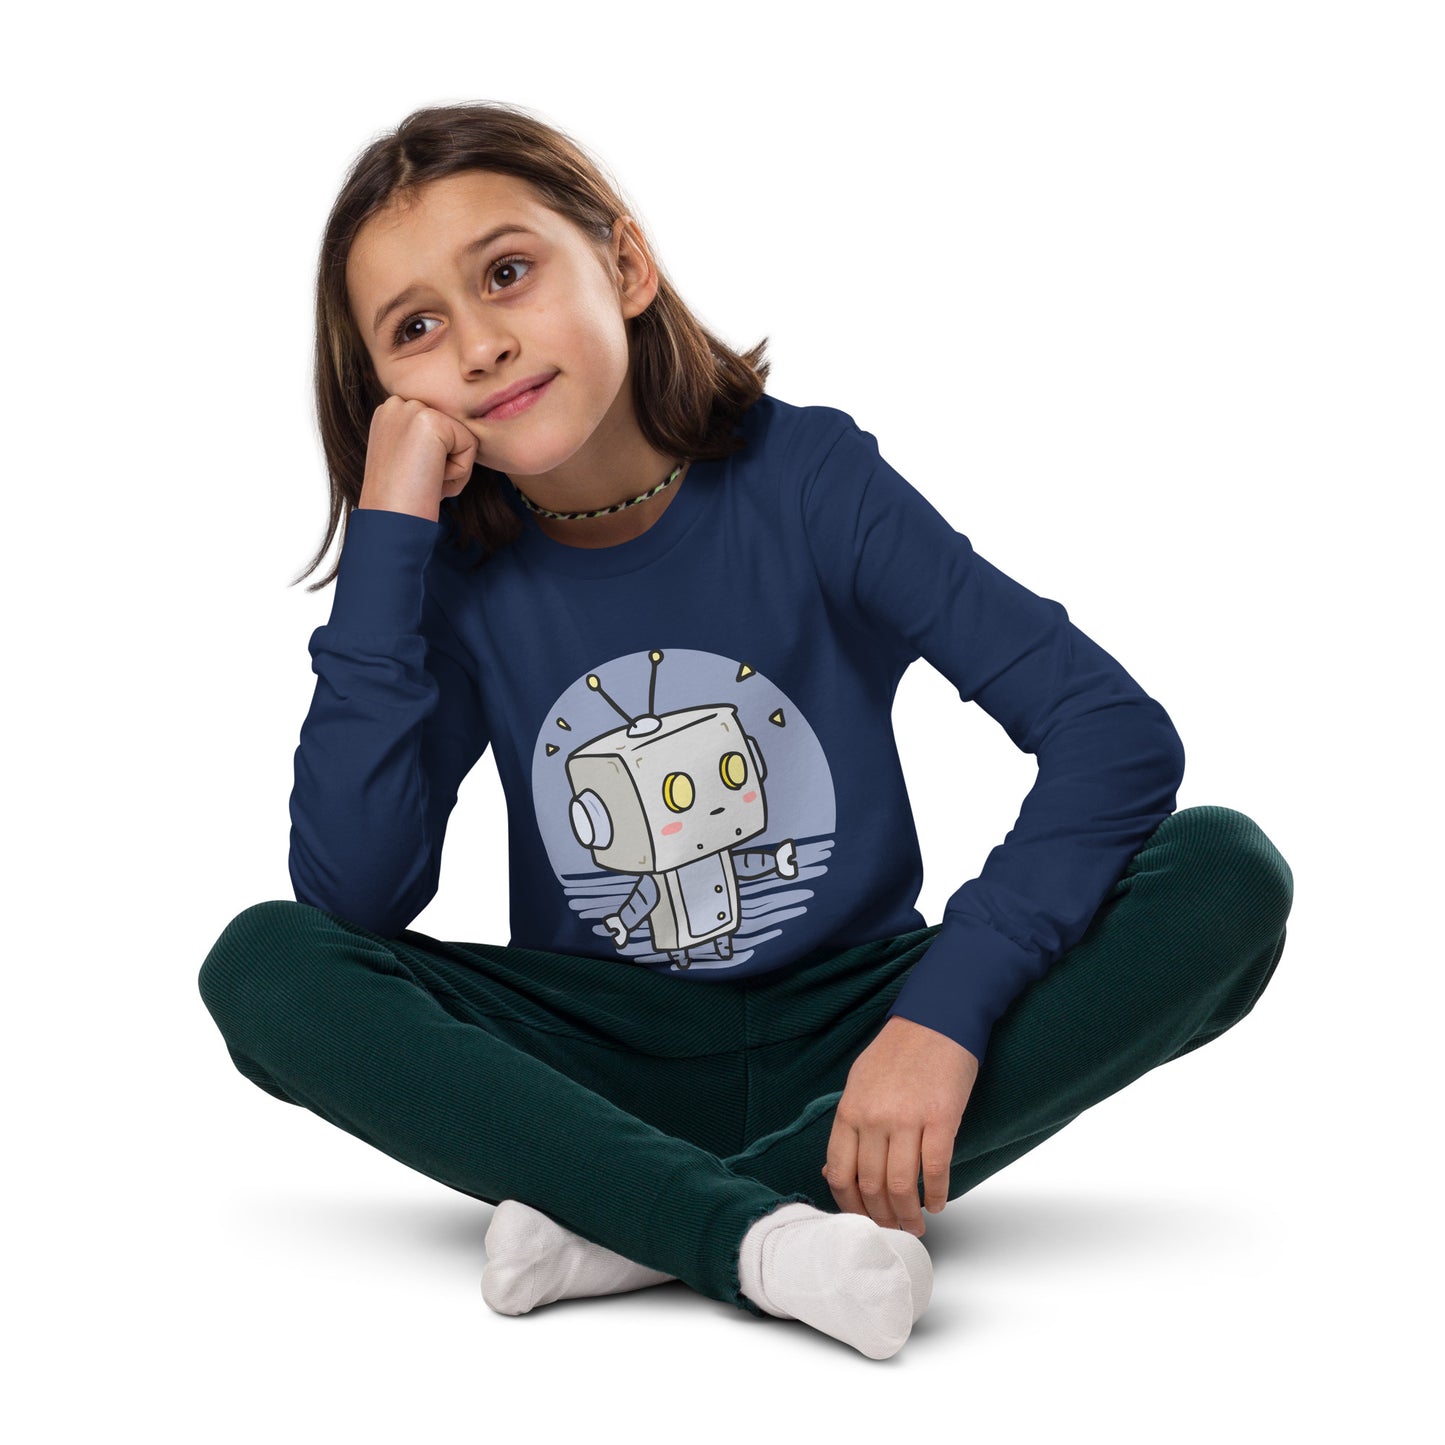 Robot | Kids and Youth Long Sleeve Shirt | Navy